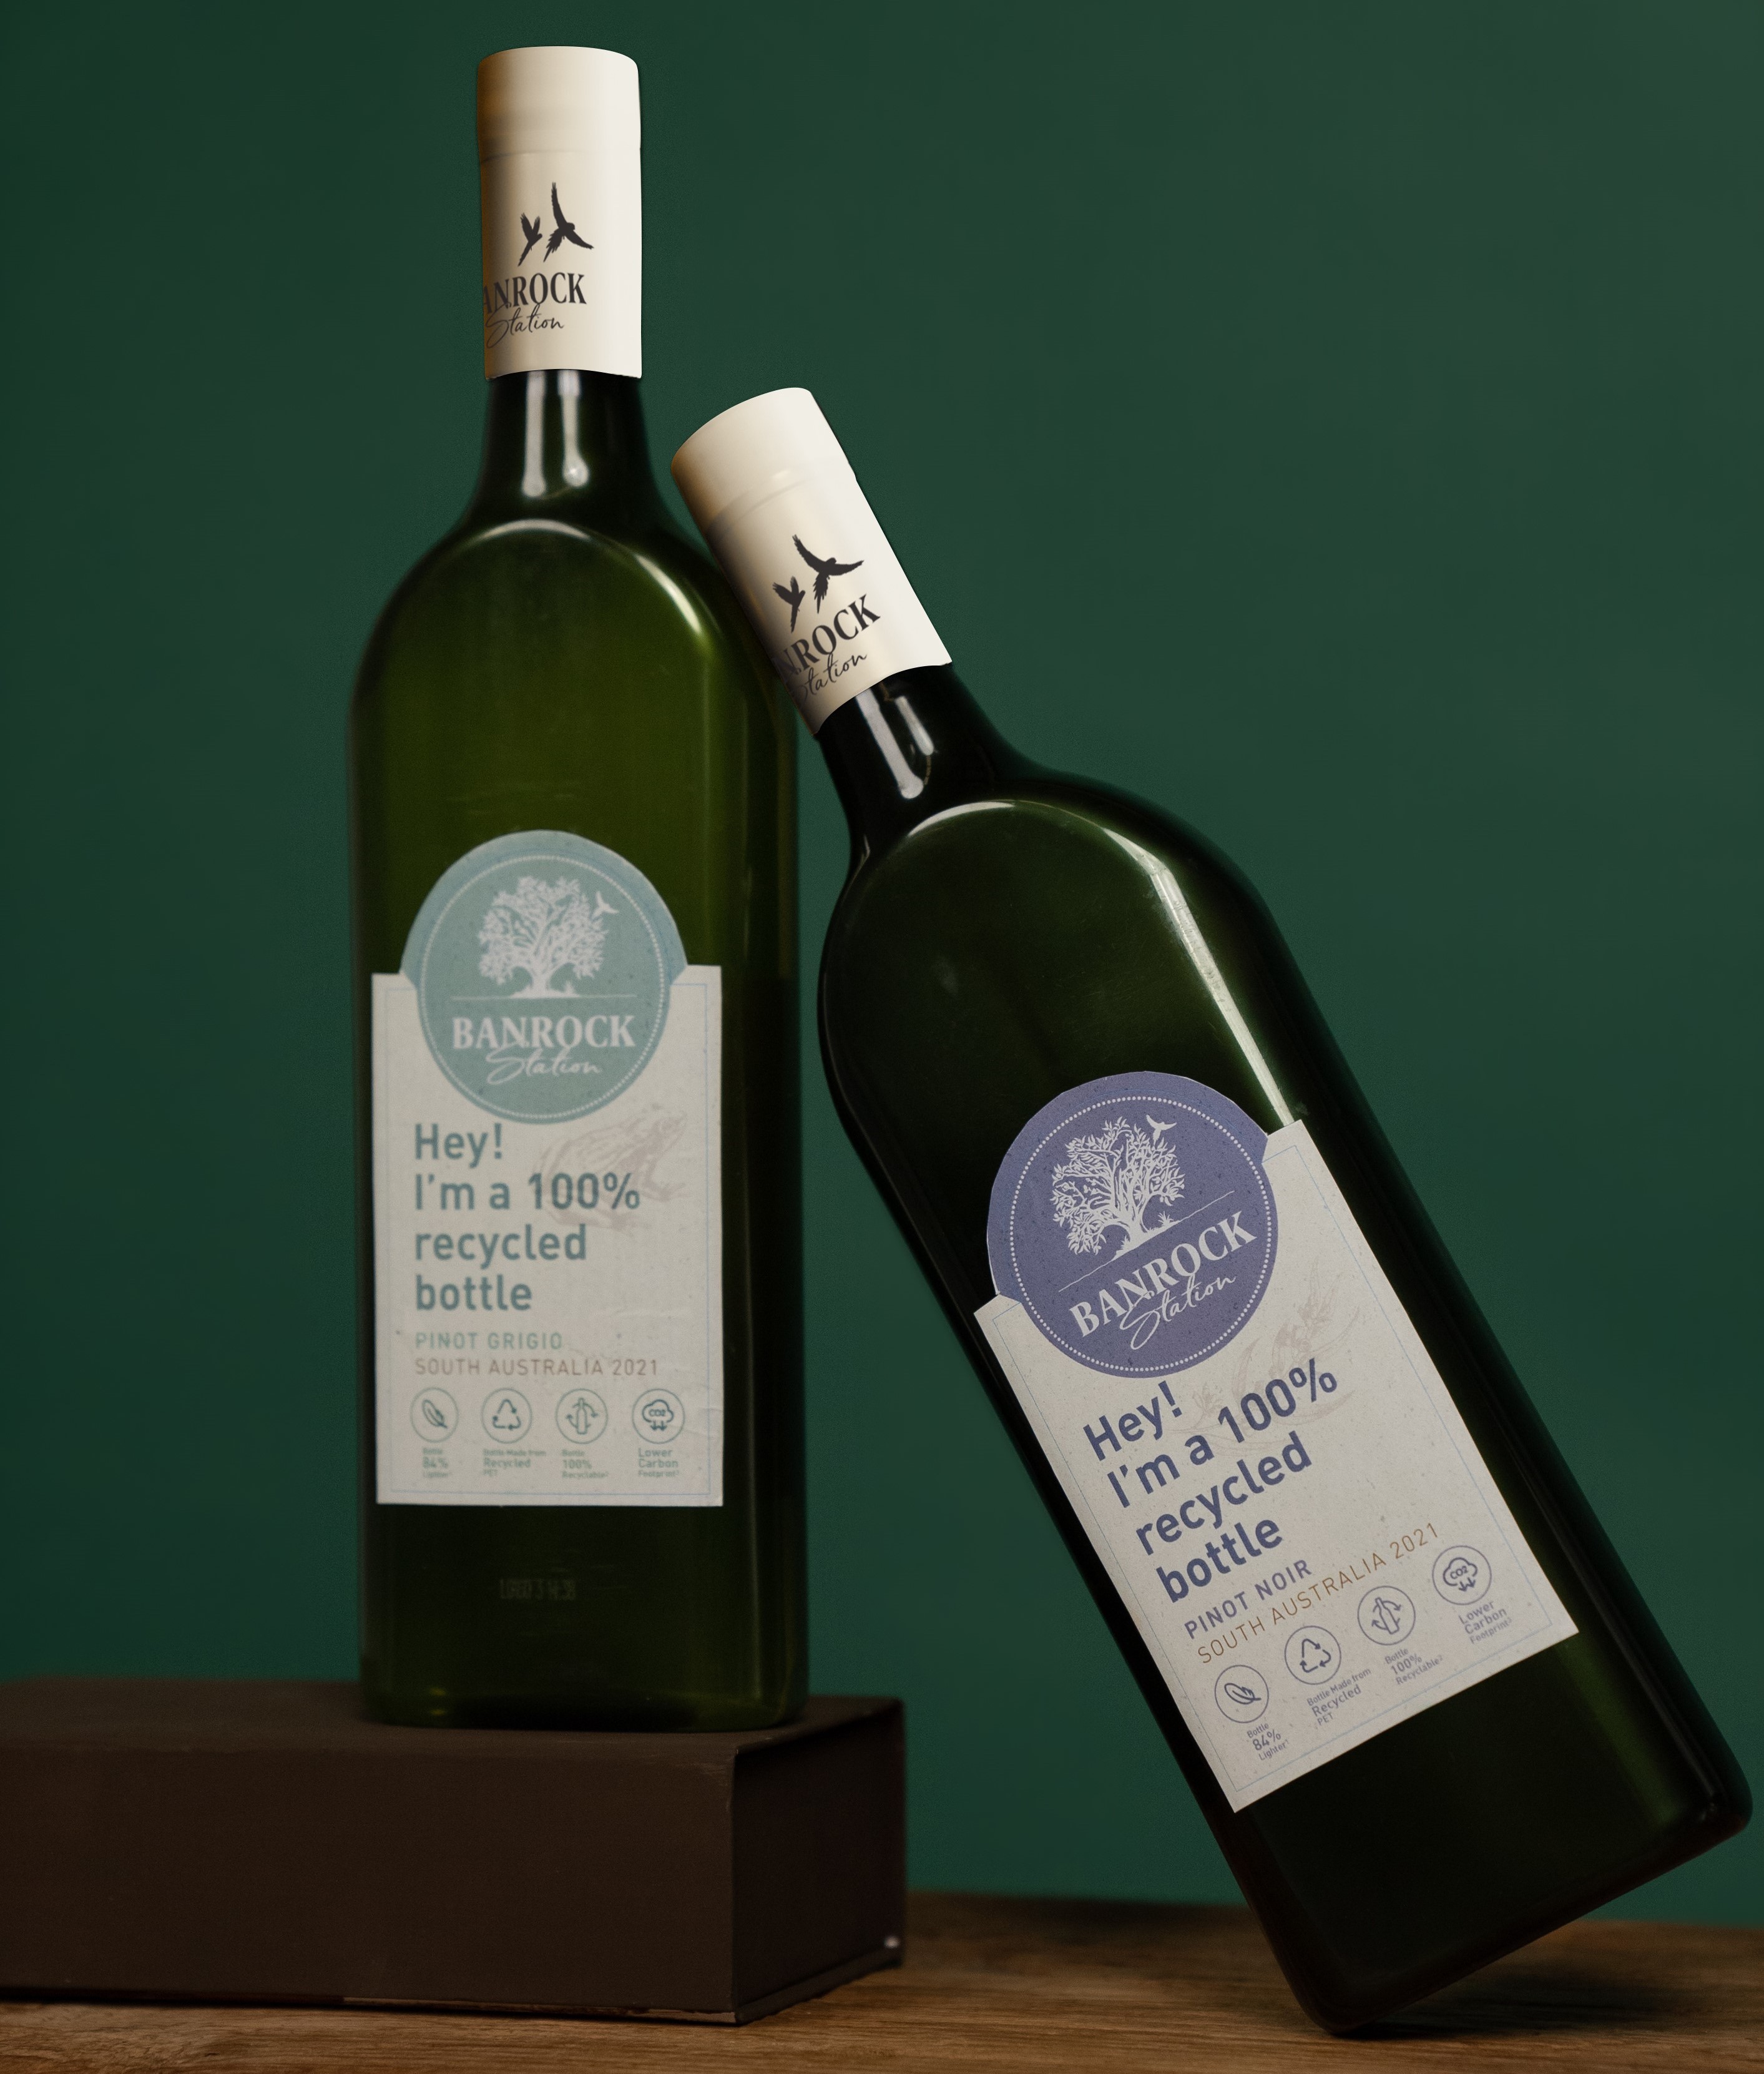 Eco bottles made entirely from Australian-sourced 100% recycled PET plastic is helping to reshape the carbon footprint of wine by targeting the industry’s environmental hotspot, the glass bottle.